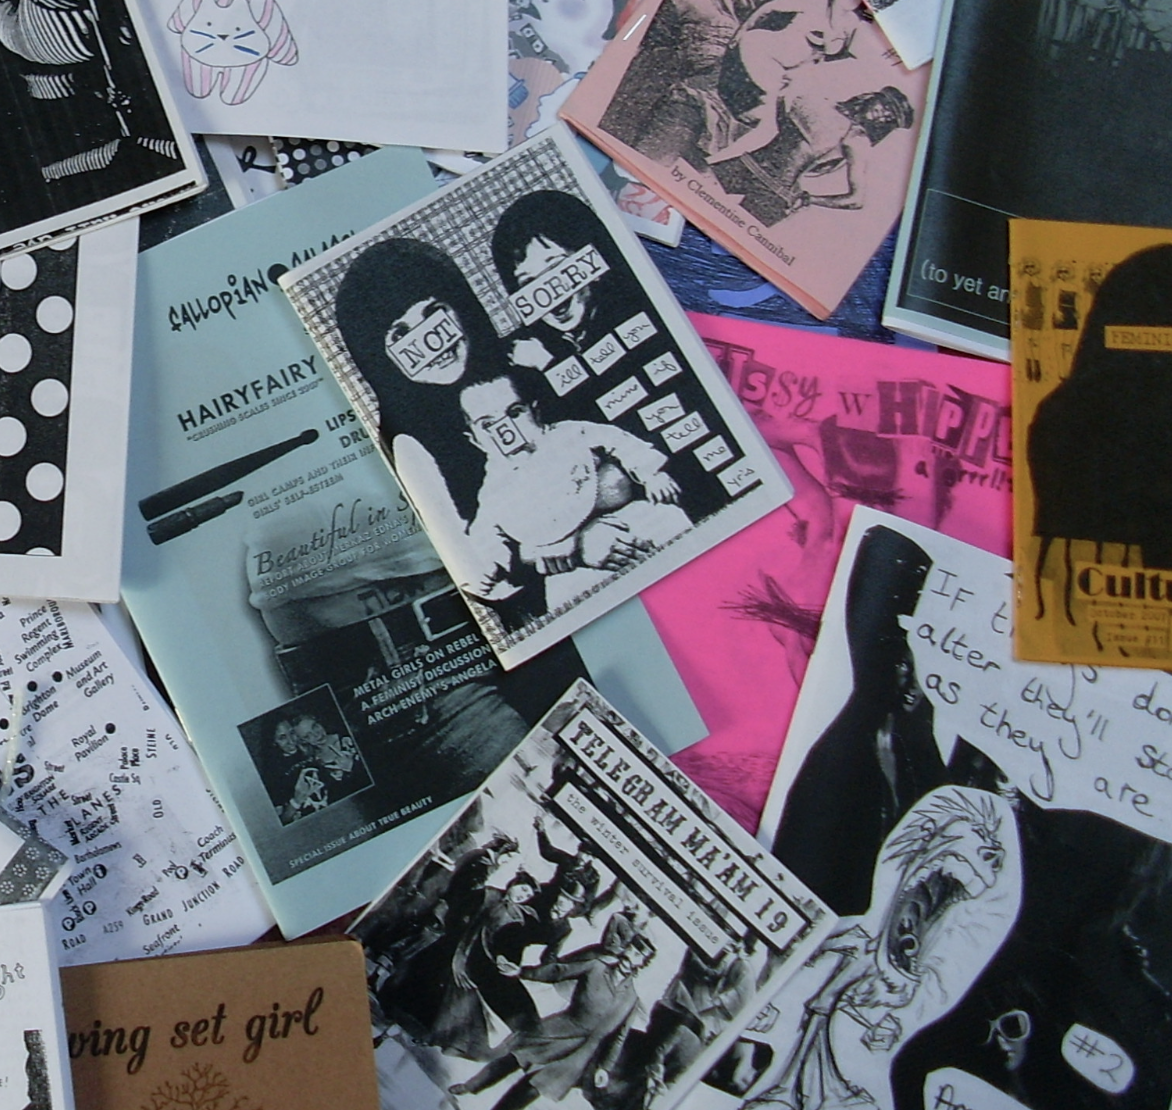 array of zines in black and white, blue, and pink